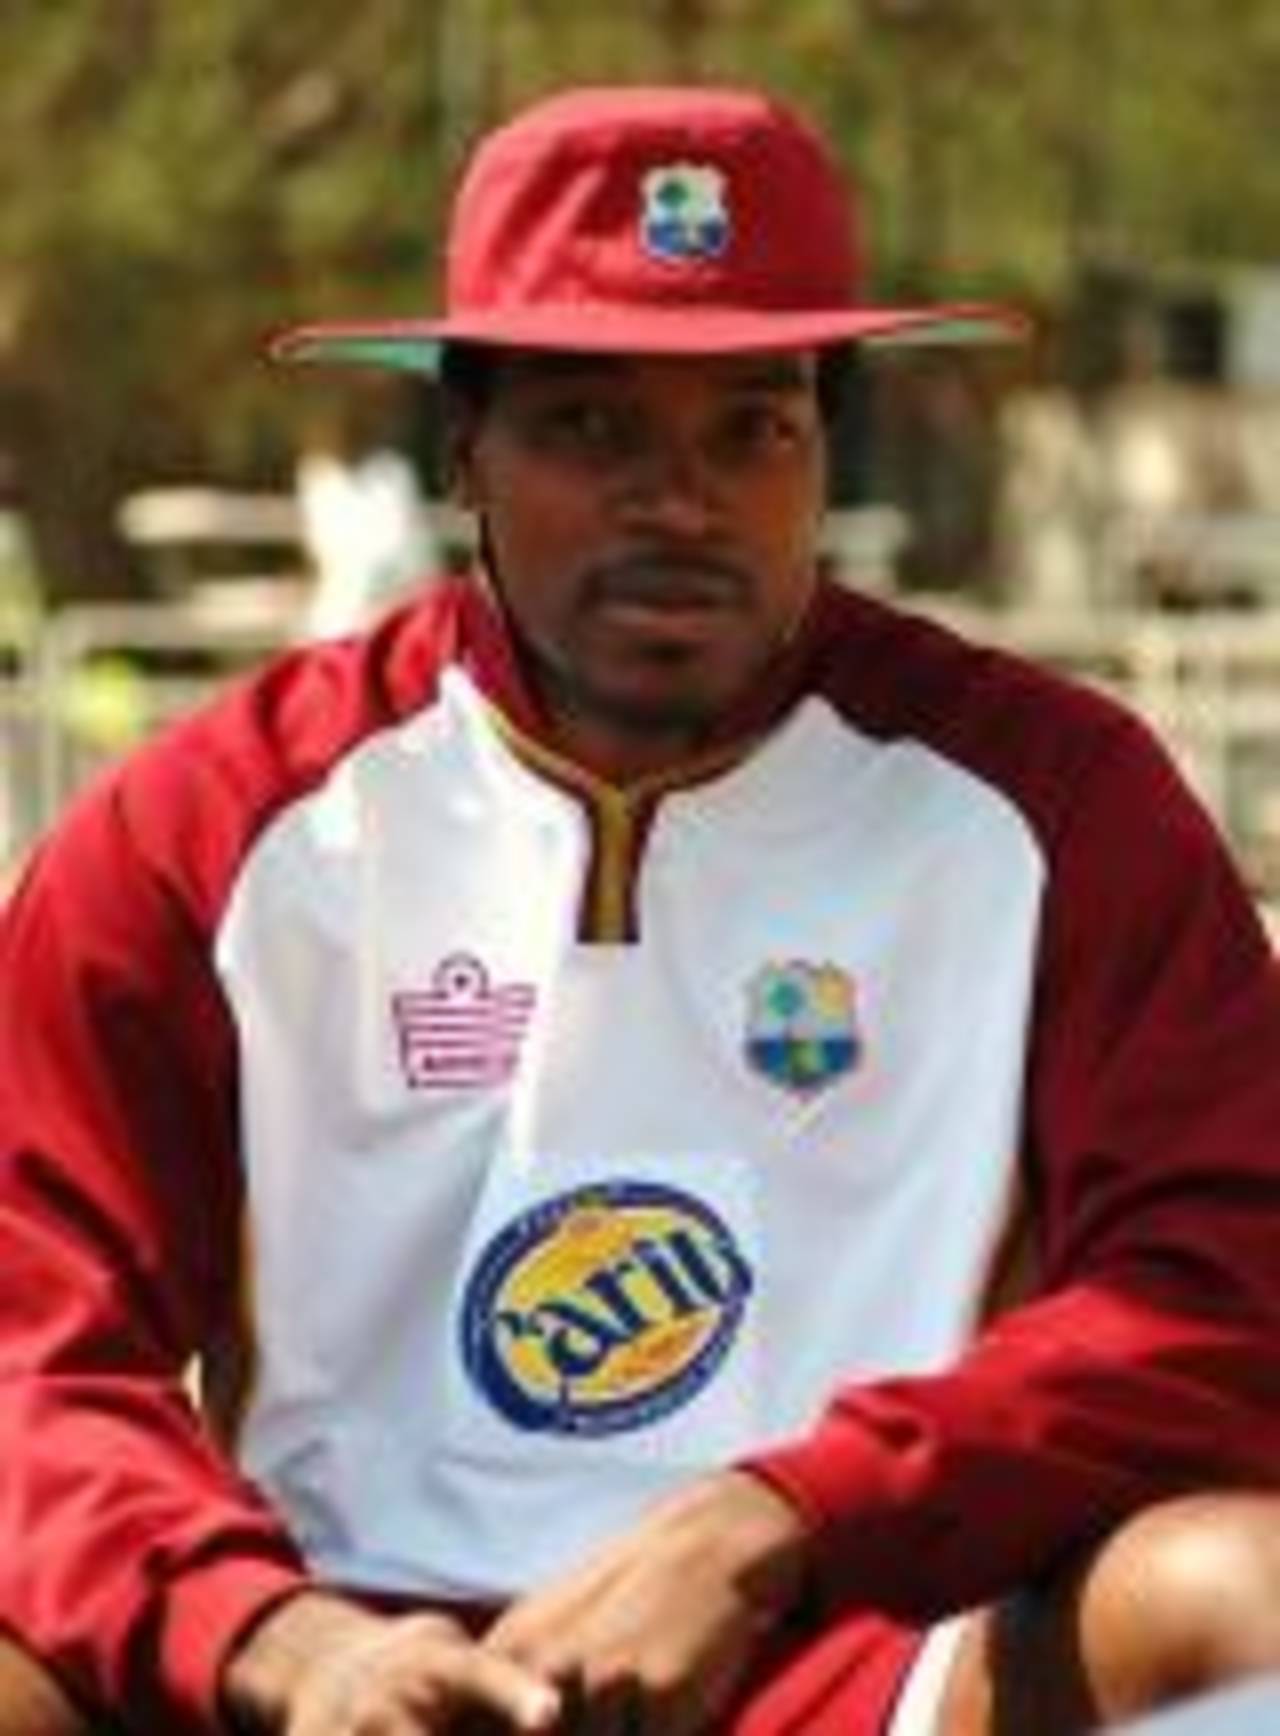 Chris Gayle sits out of practice session due to a bruised right knee, Johannesburg, September 7, 2007 